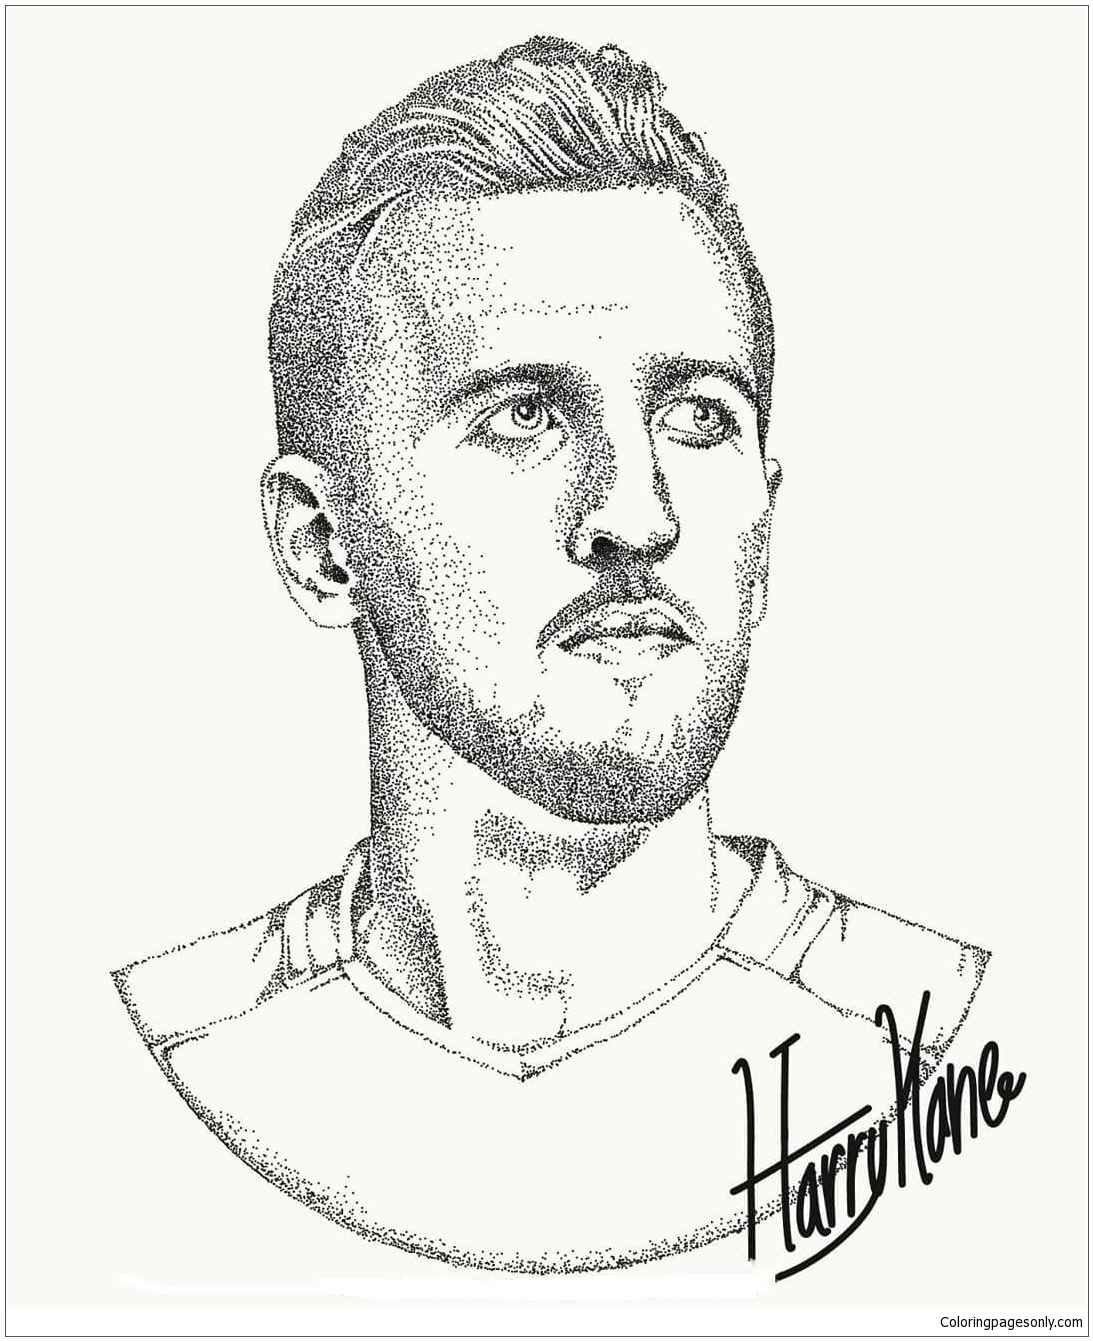 harry-kane-image-9-coloring-page-free-coloring-pages-online